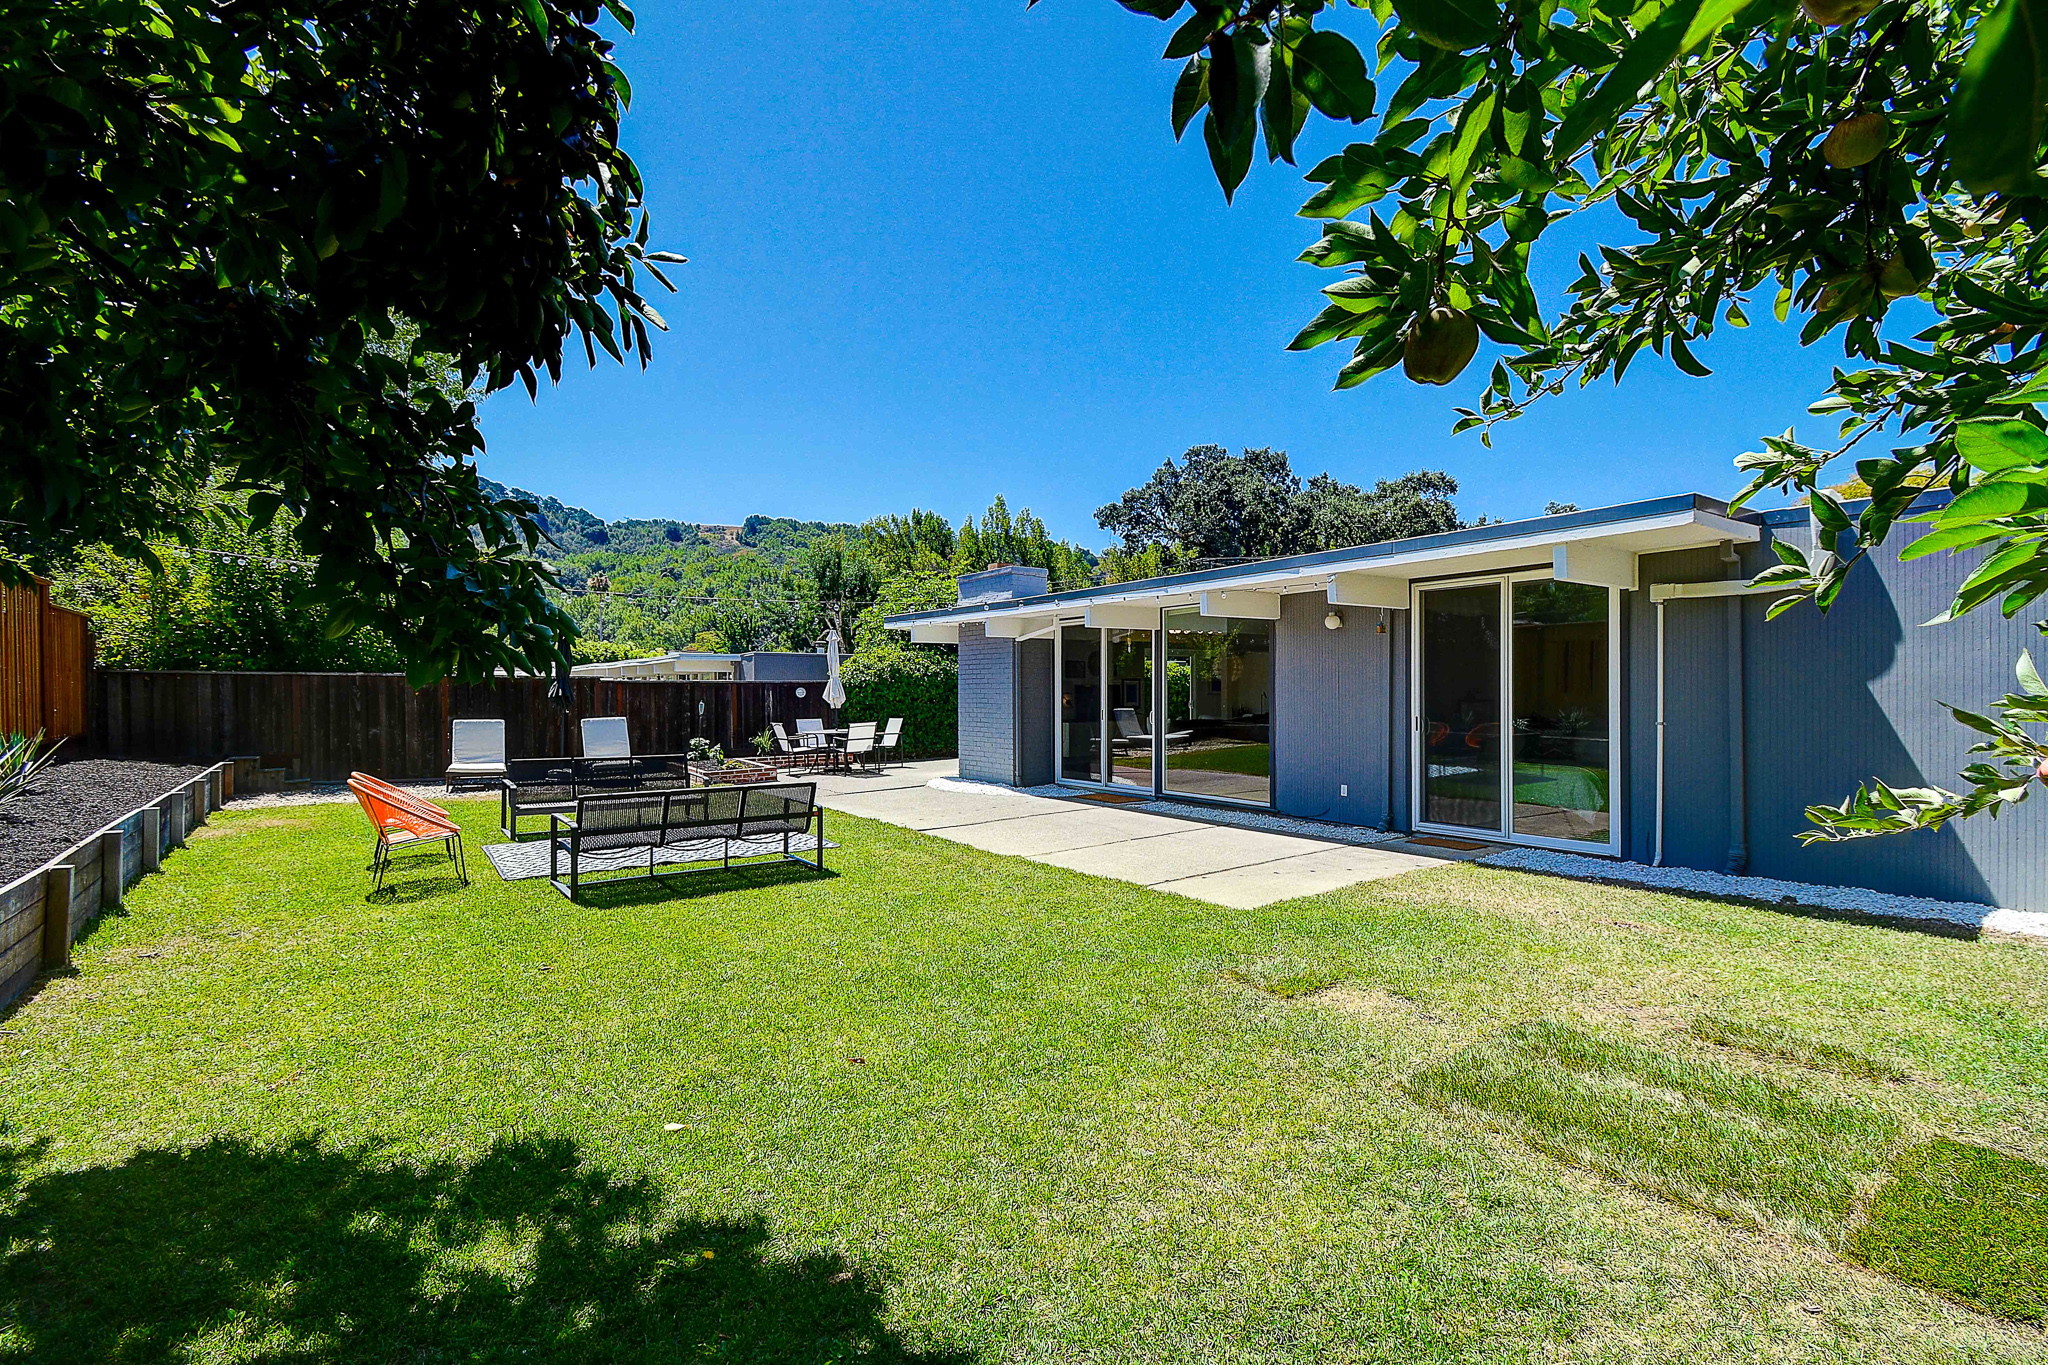 2058 Huckleberry Road-27San Rafael Real Estate - Listed by Team Own Marin County #1 Real Estate Team.jpg